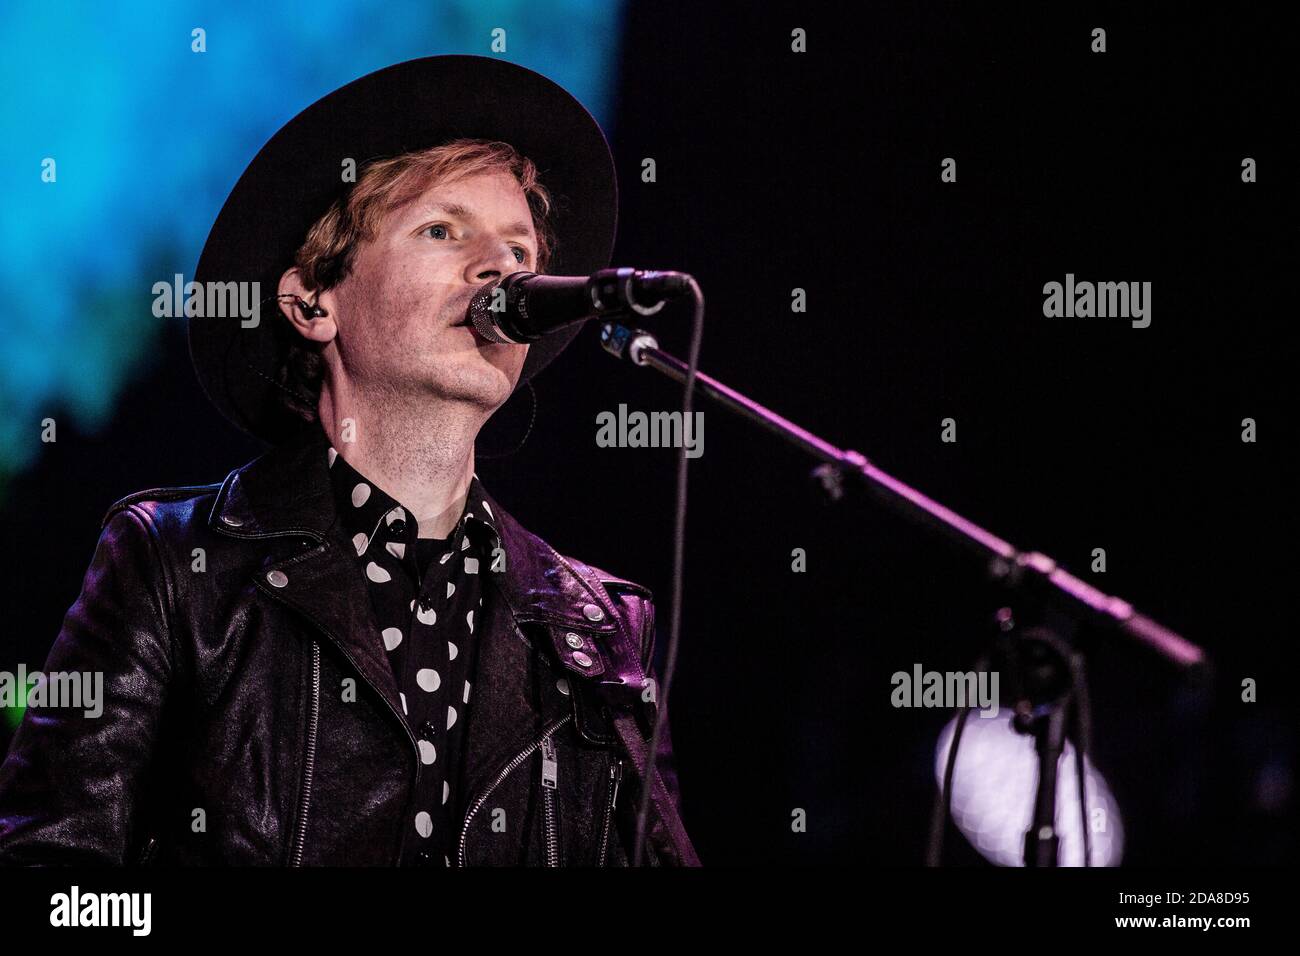 Aarhus, Denmark. 19th, June 2016. The American singer, songwriter and  multi-instrumentalist Beck performs a live concert at the Danish music  festival NorthSide 2016 in Aarhus. (Photo credit: Gonzales Photo - Lasse  Lagoni